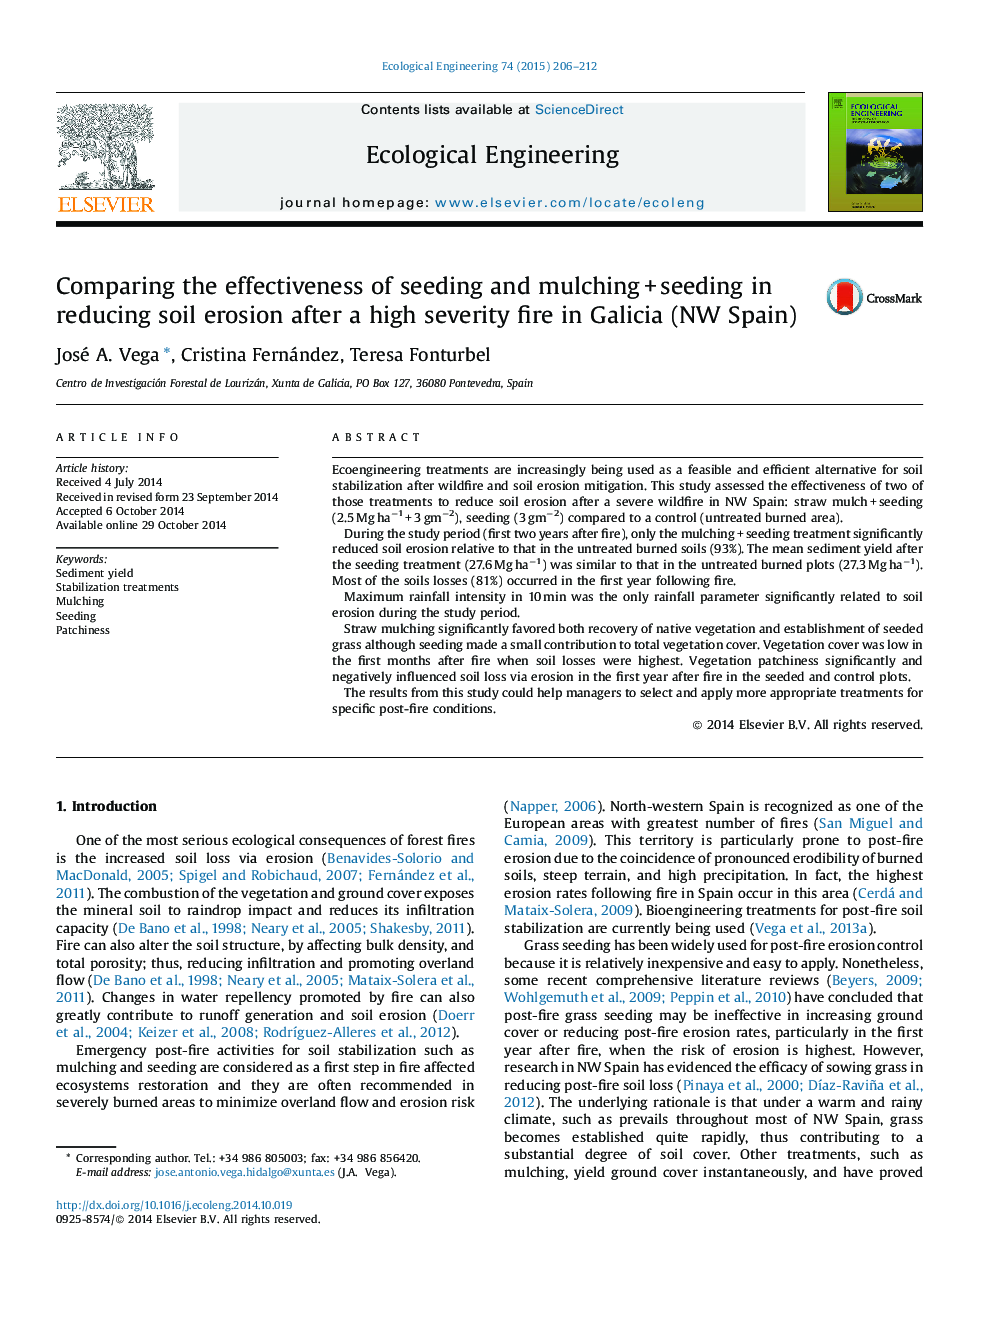 Comparing the effectiveness of seeding and mulching + seeding in reducing soil erosion after a high severity fire in Galicia (NW Spain)